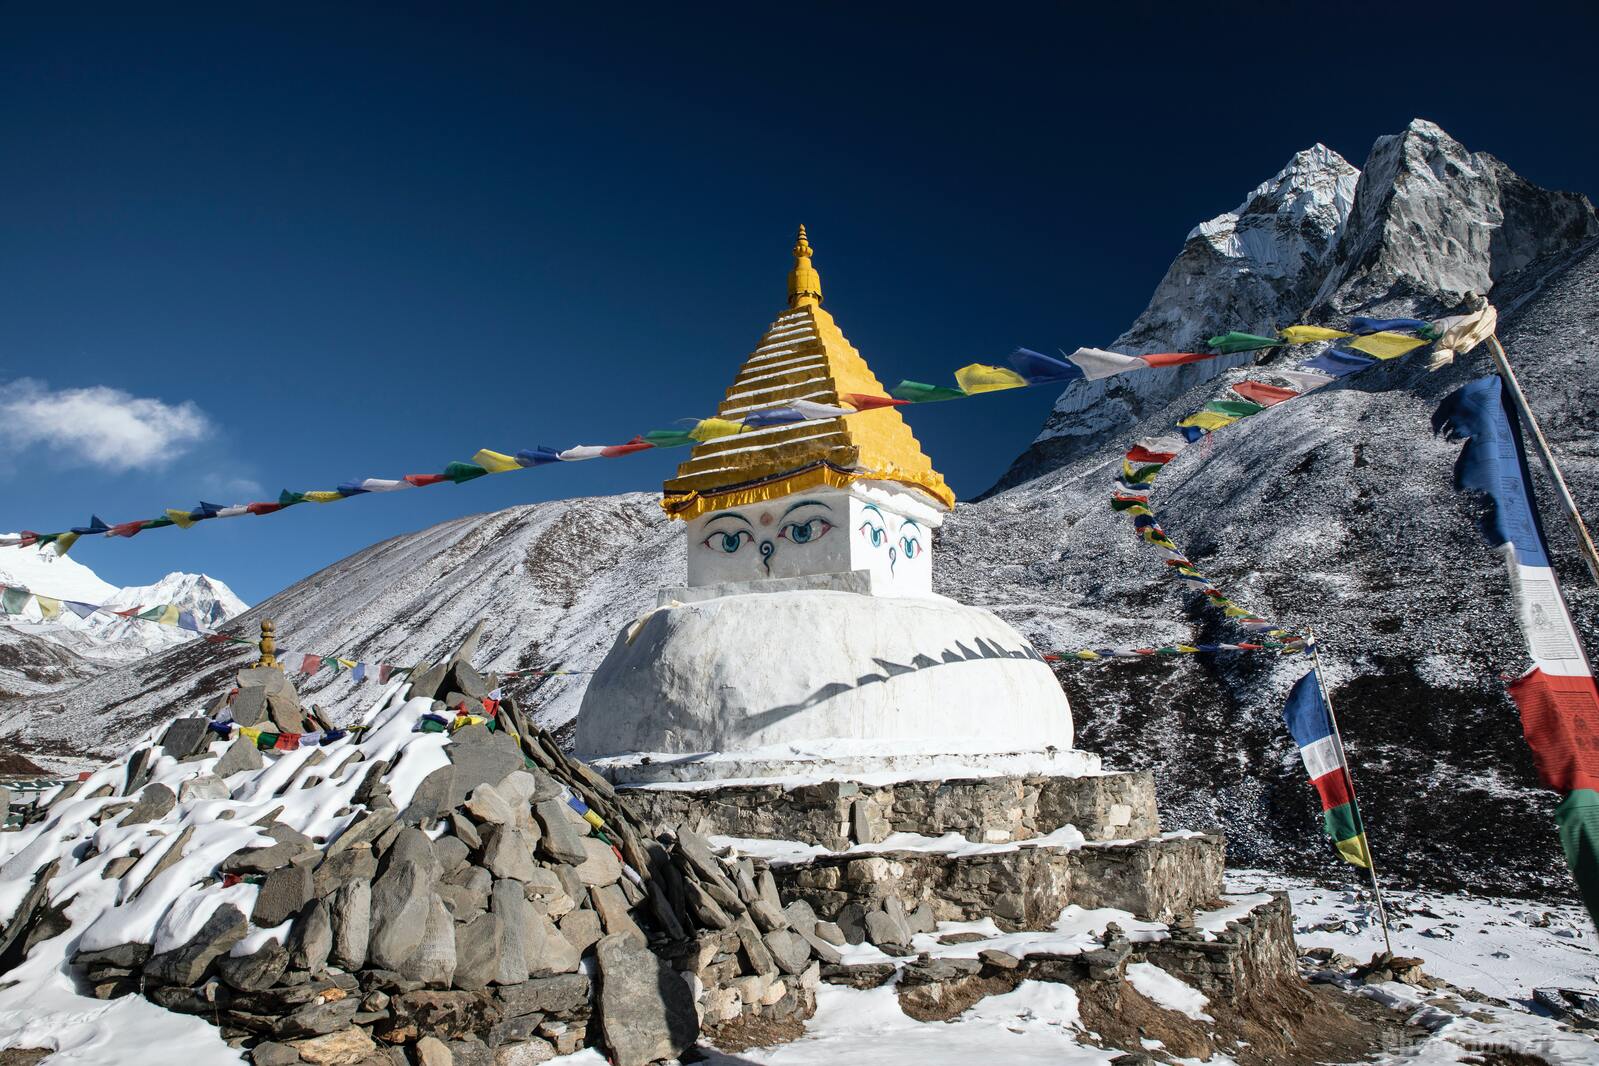 Image of Dingboche Village and its Stupa by Team PhotoHound